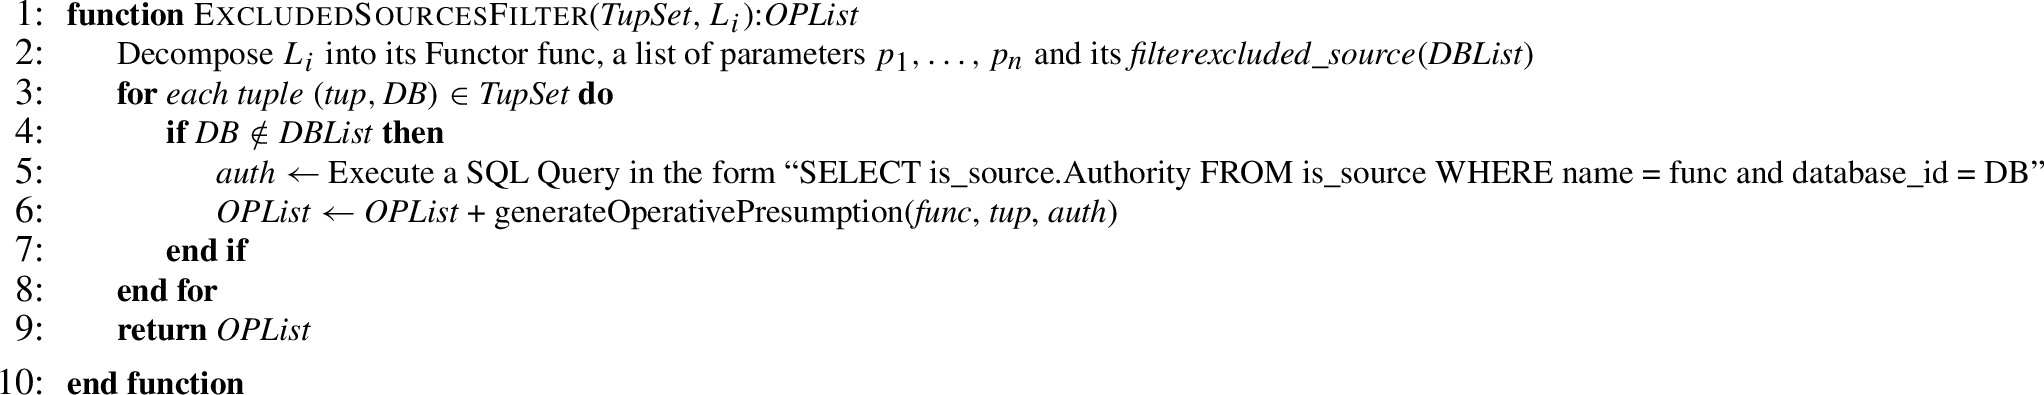 Excluded sources filter function